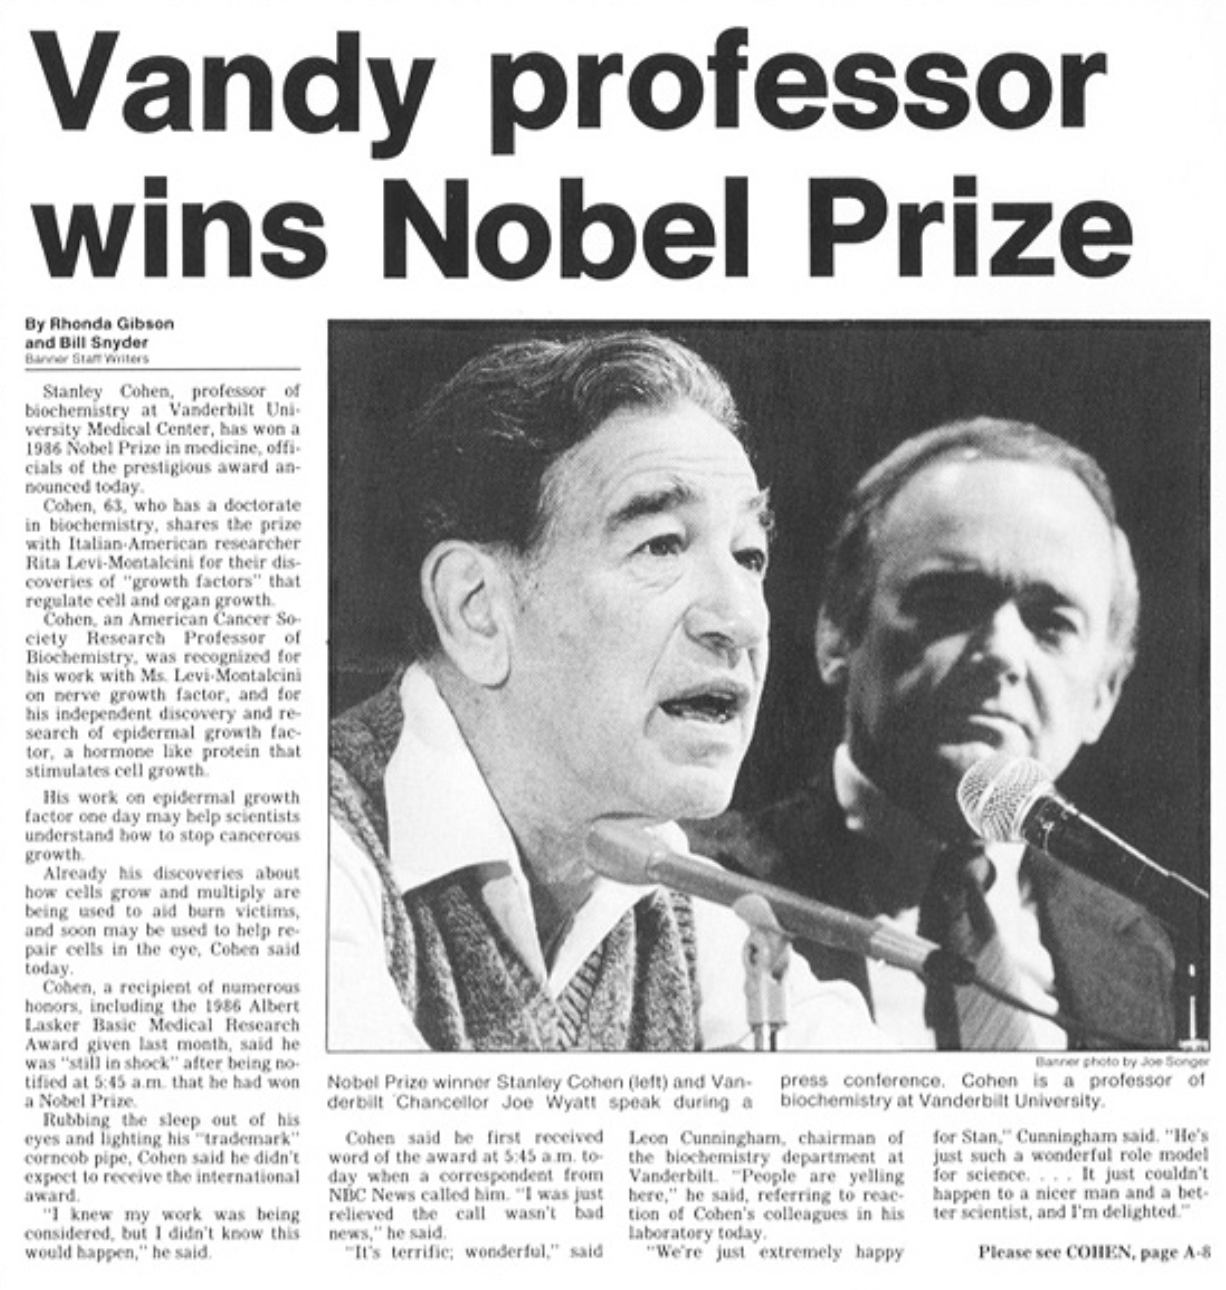 Newspaper page with the headline "Vandy professor wins Nobel Prize." A photo shows Stanley Cohen at a table, speaking into a microphone, another person beside him.